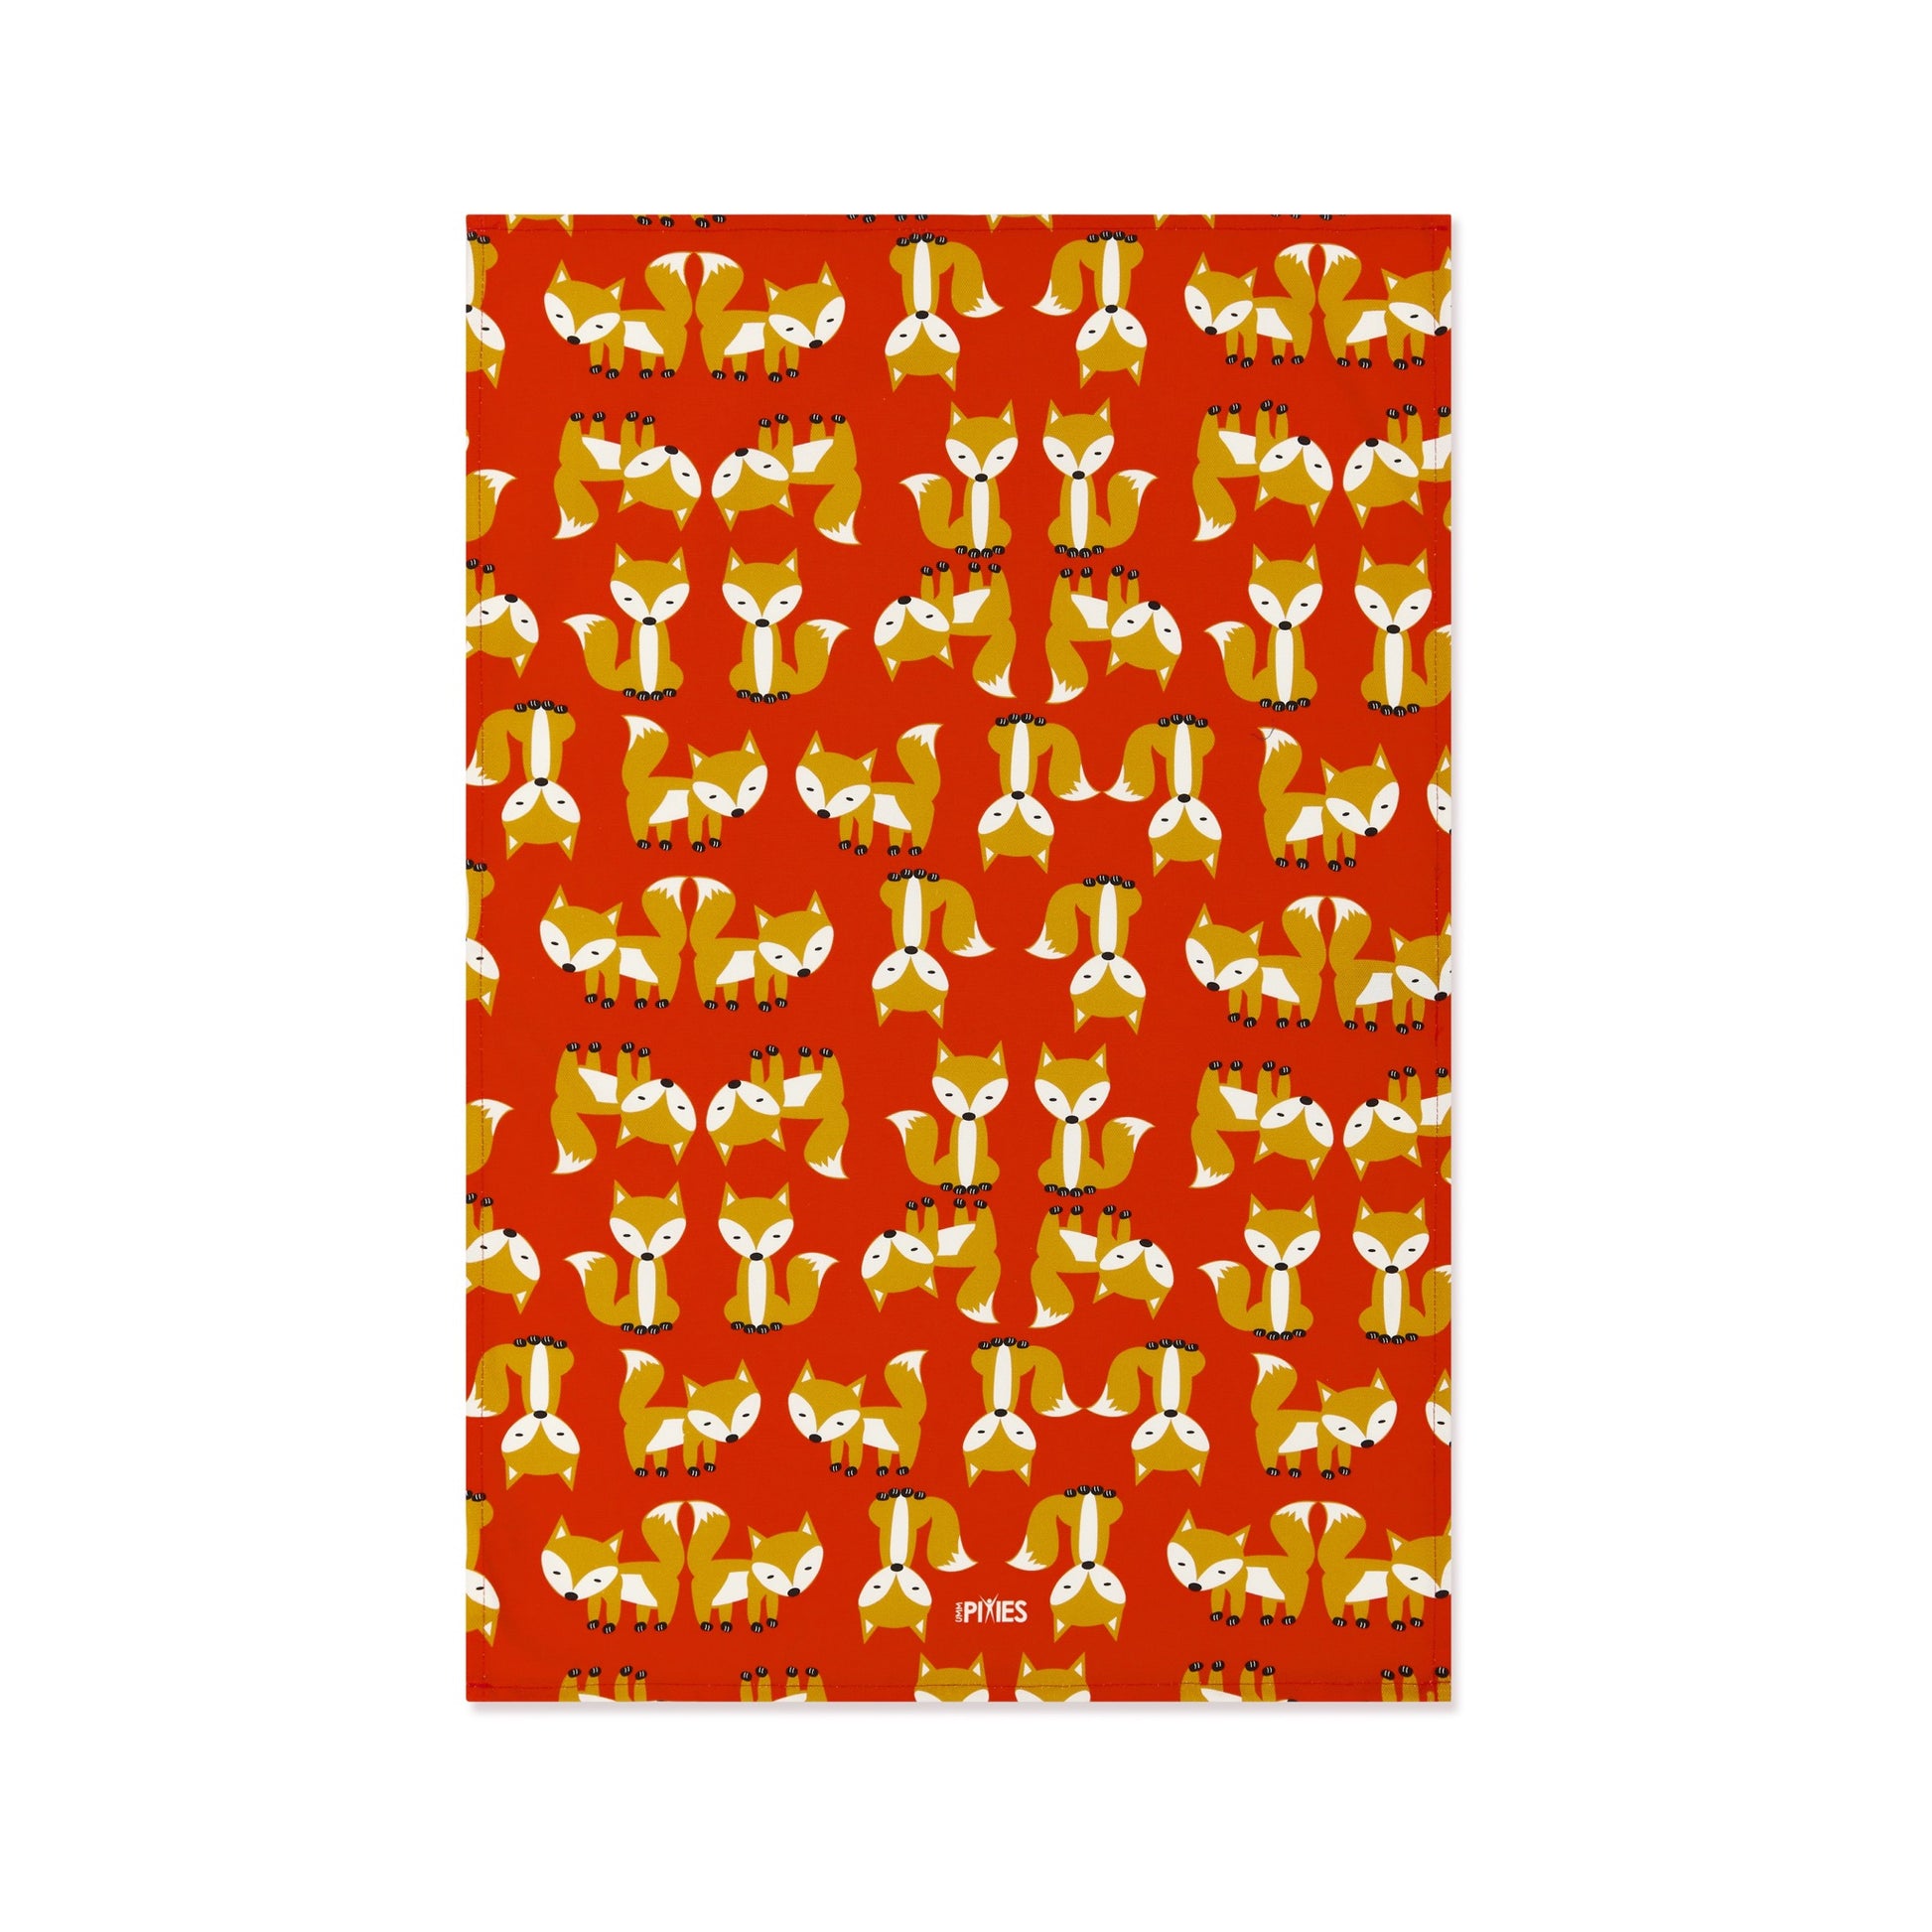 Red Fox Parade Tea Towel in organic Cotton from UmmPixies. Designed and made in the UK